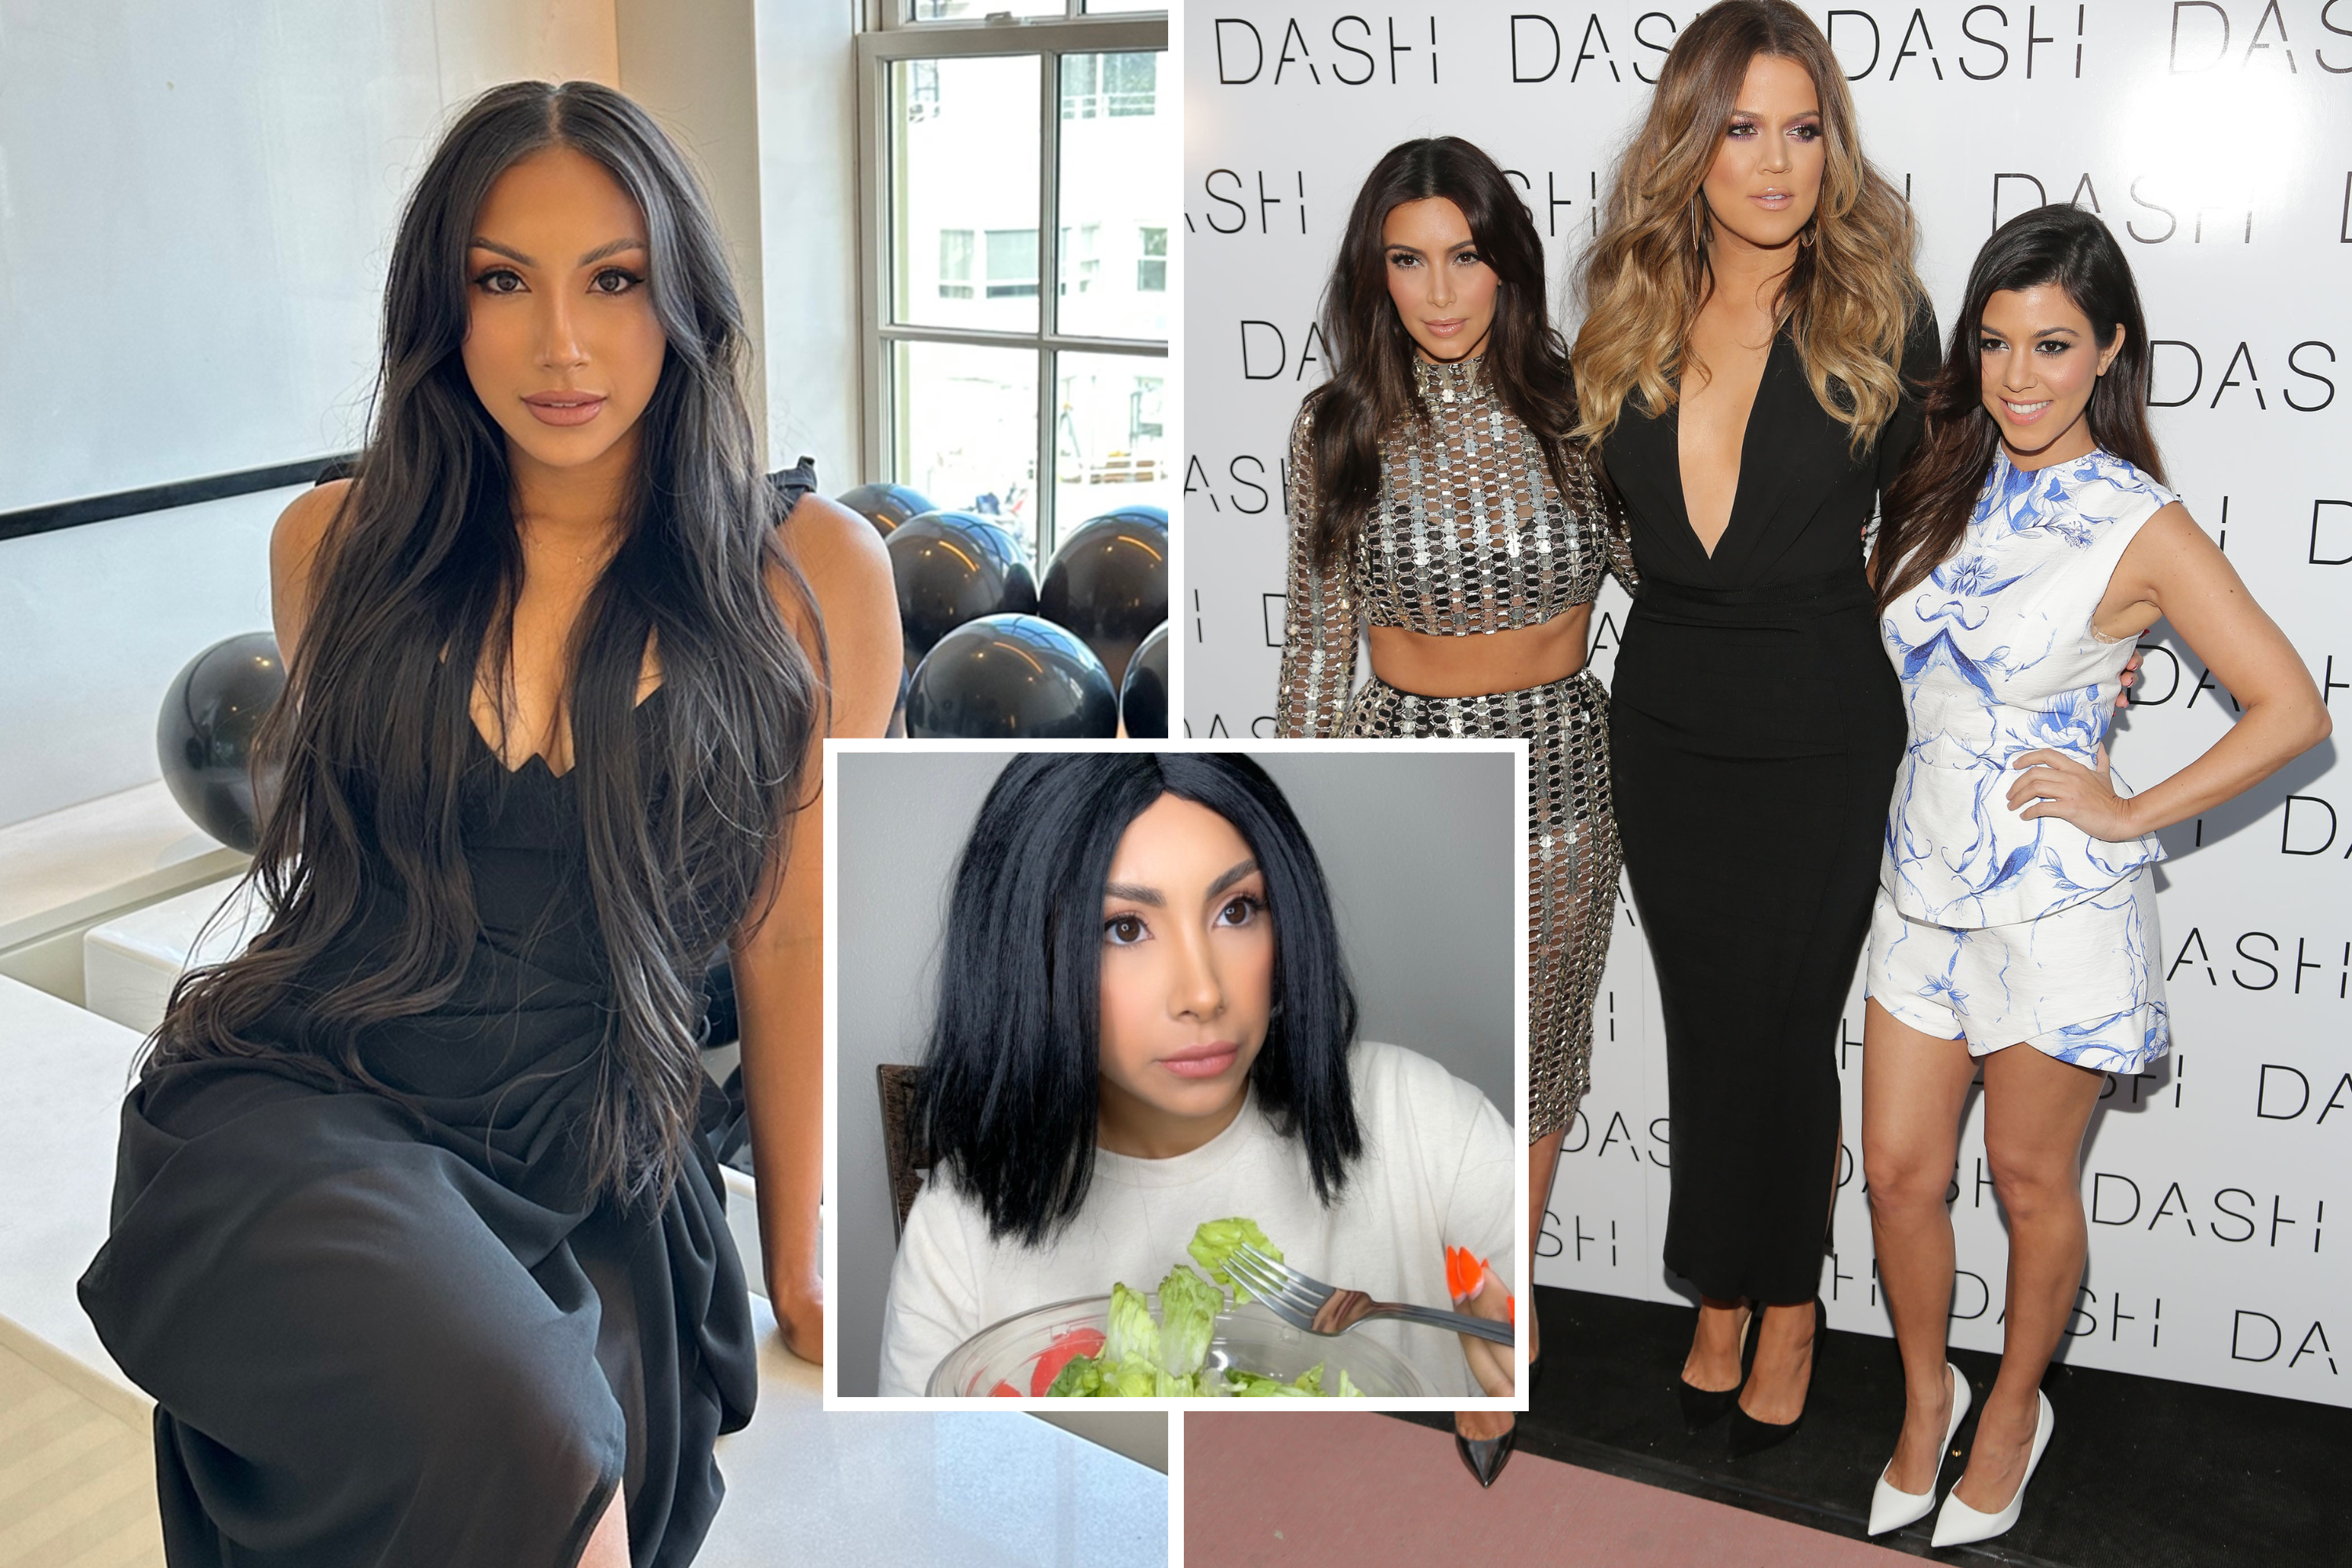 The Woman Who Built A 7M Following For Impersonating The Kardashians